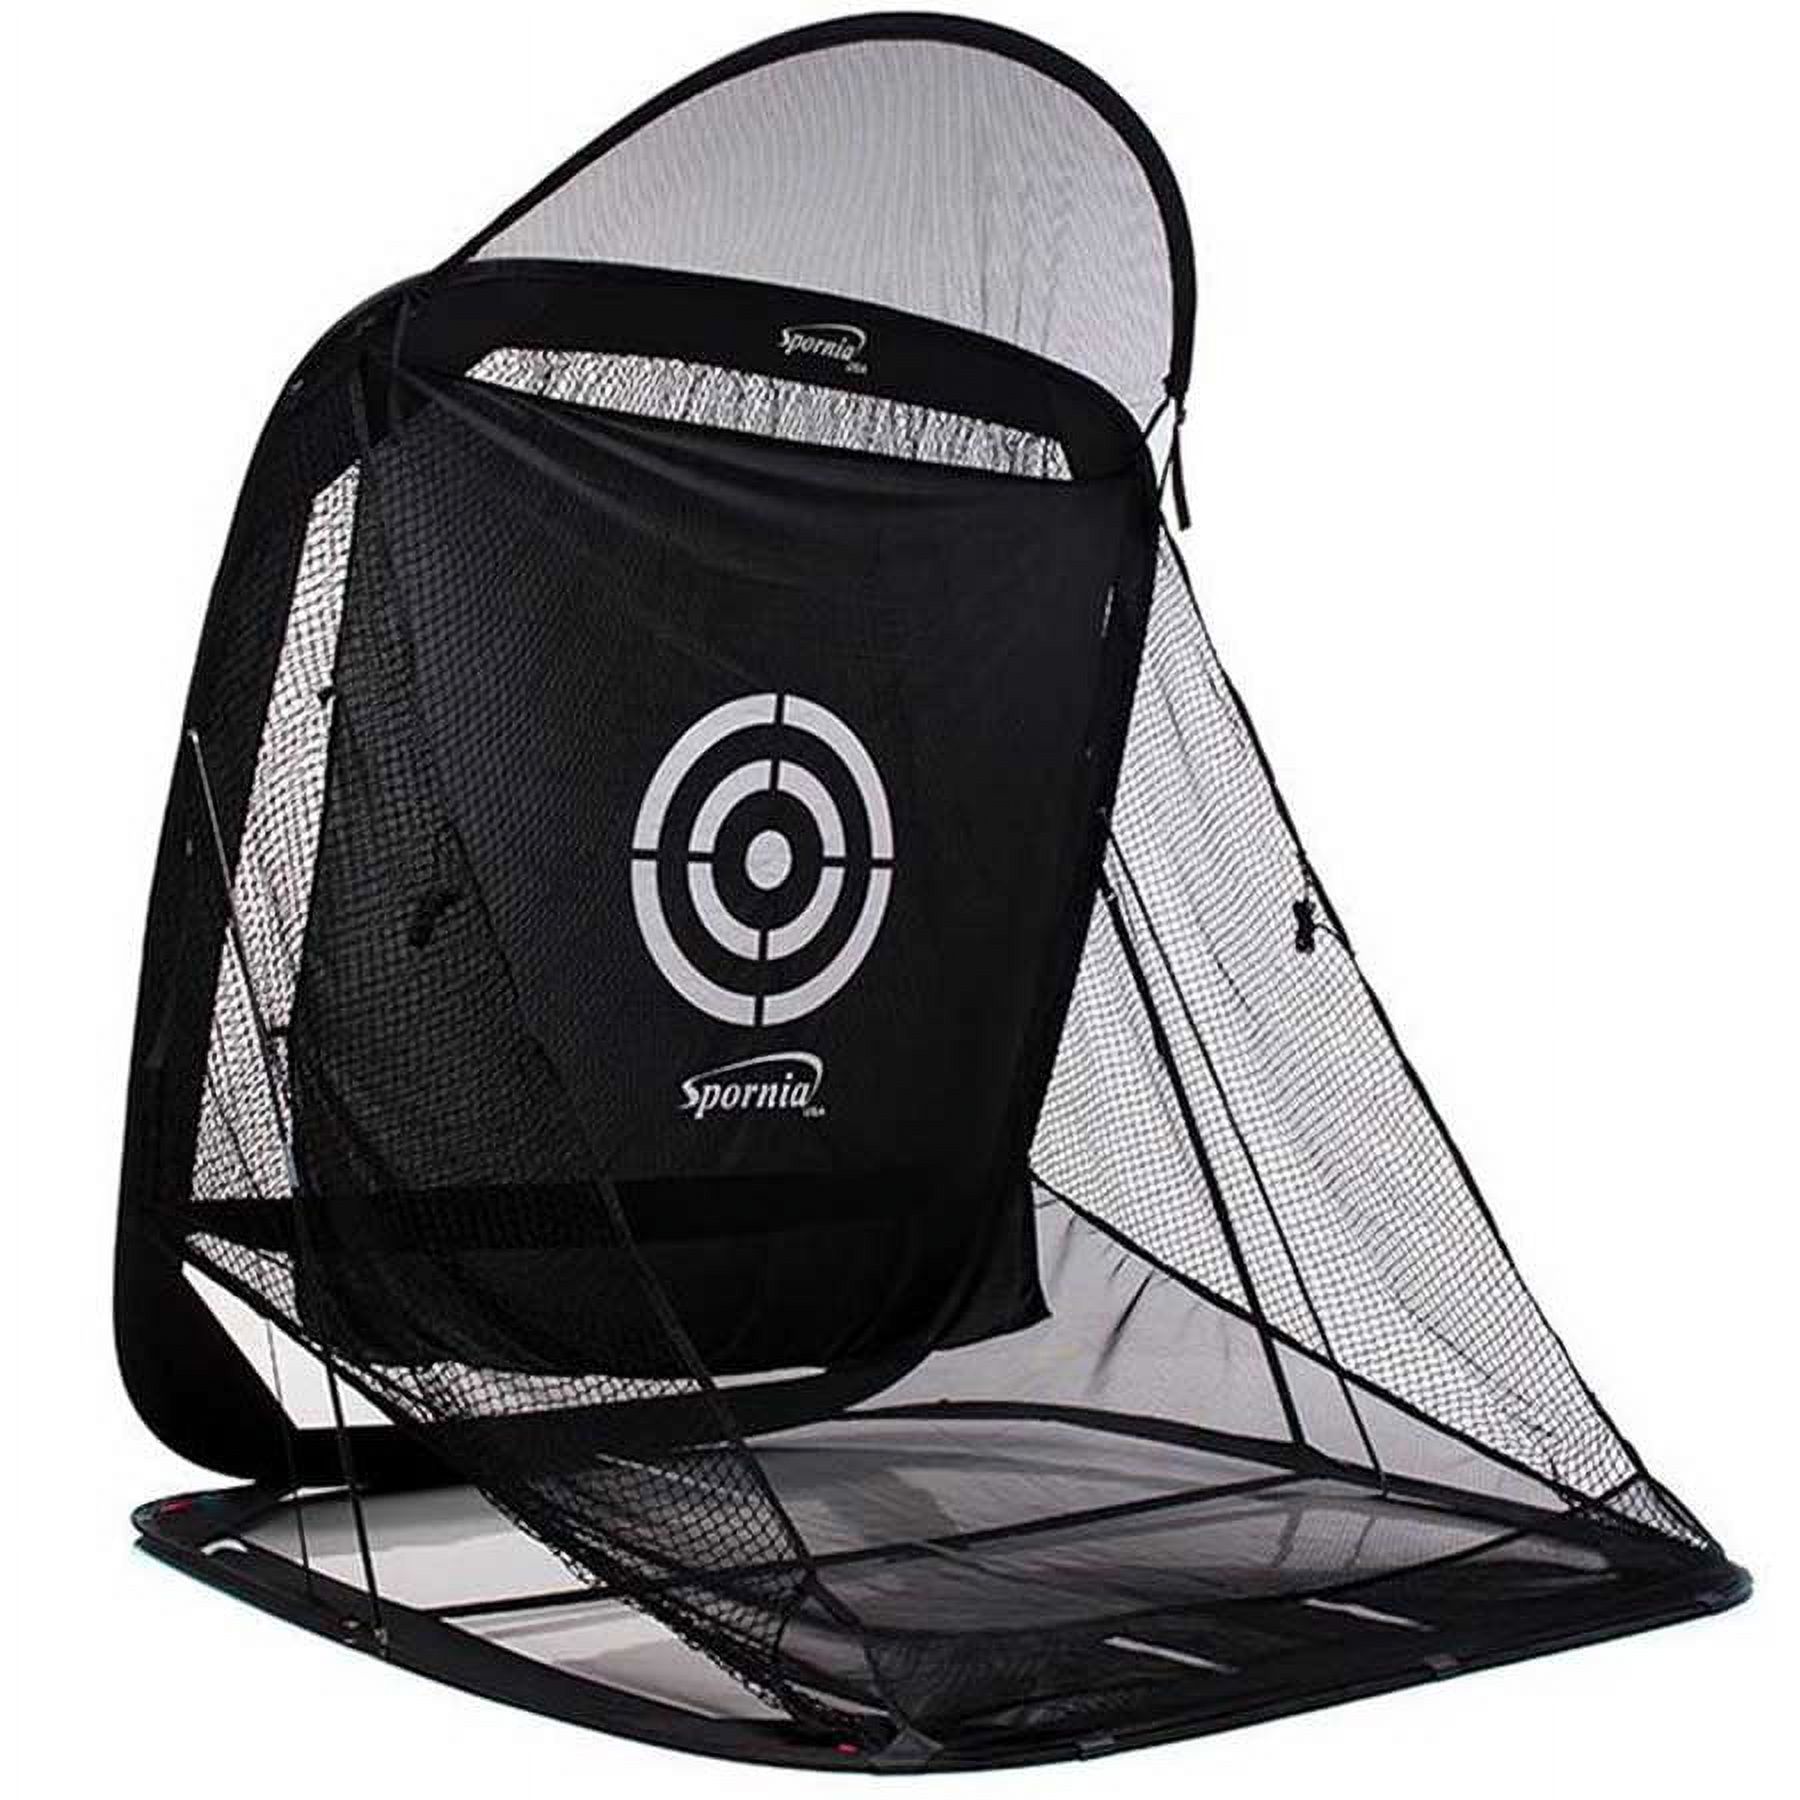 Spornia Golf Practice Net Automatic Ball Return System With Target Sheet